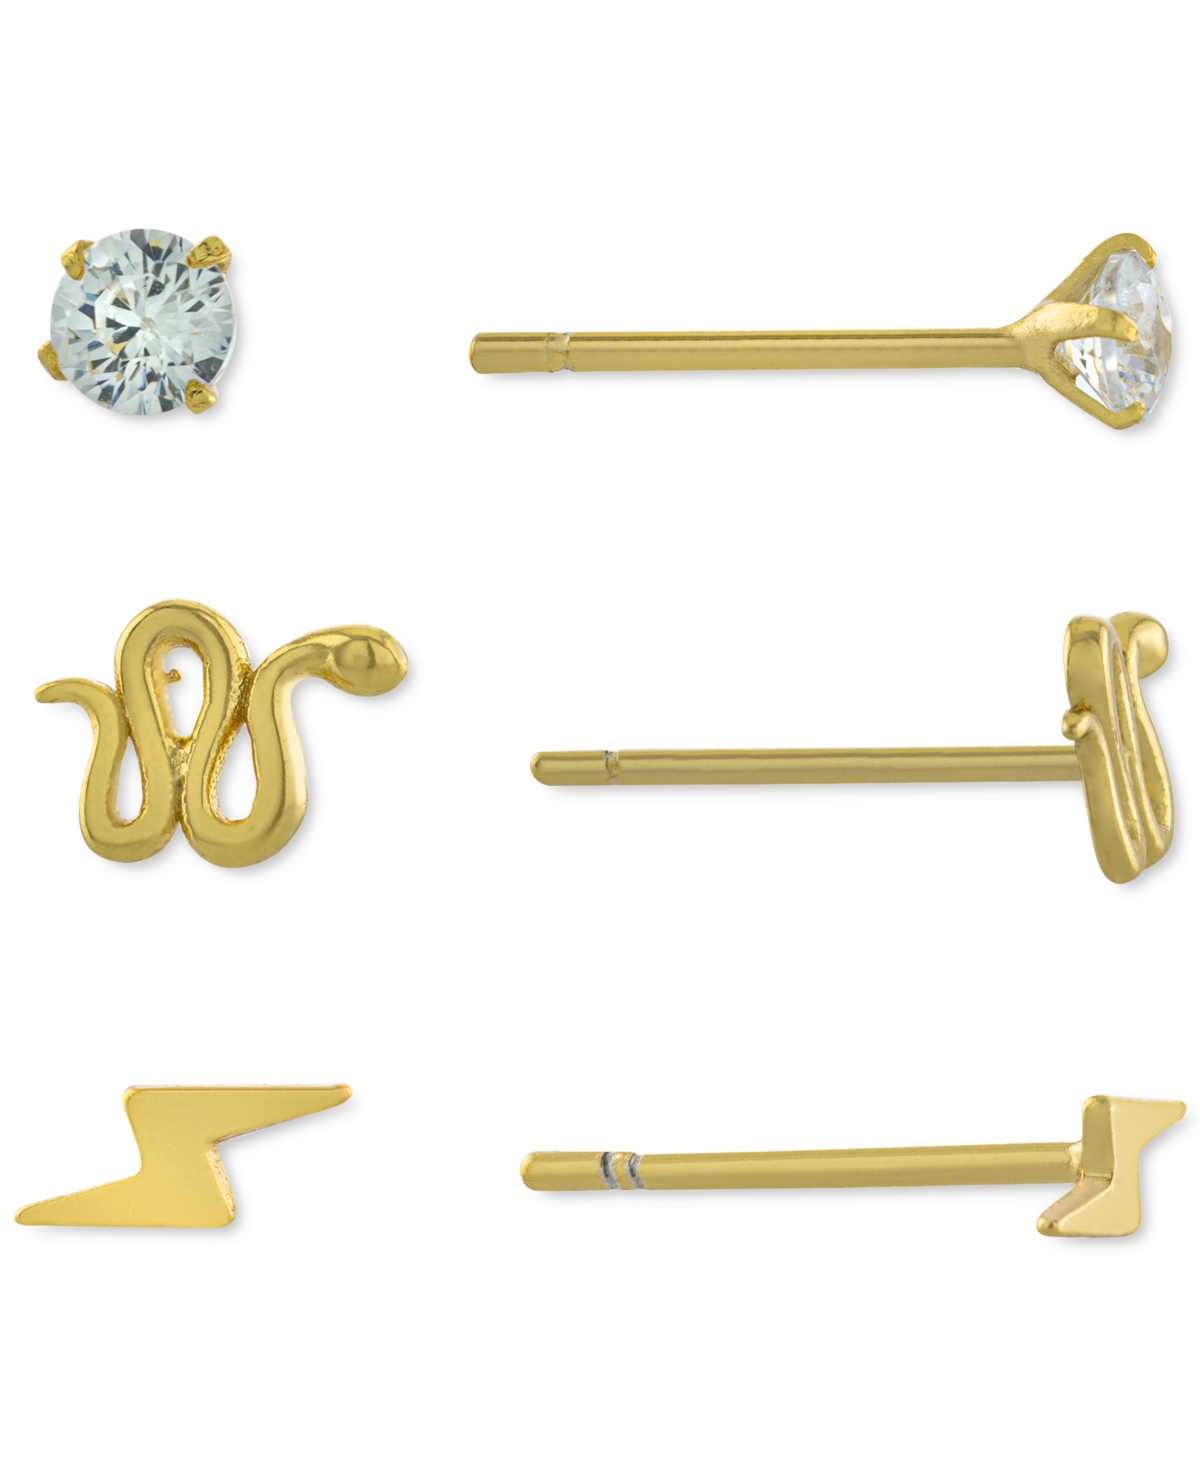 3-Pc. Set Cubic Zirconia, Snake, & Lightening Bolt Stud Earrings in Gold-Plated Sterling Silver, Created for Macy's - Yellow